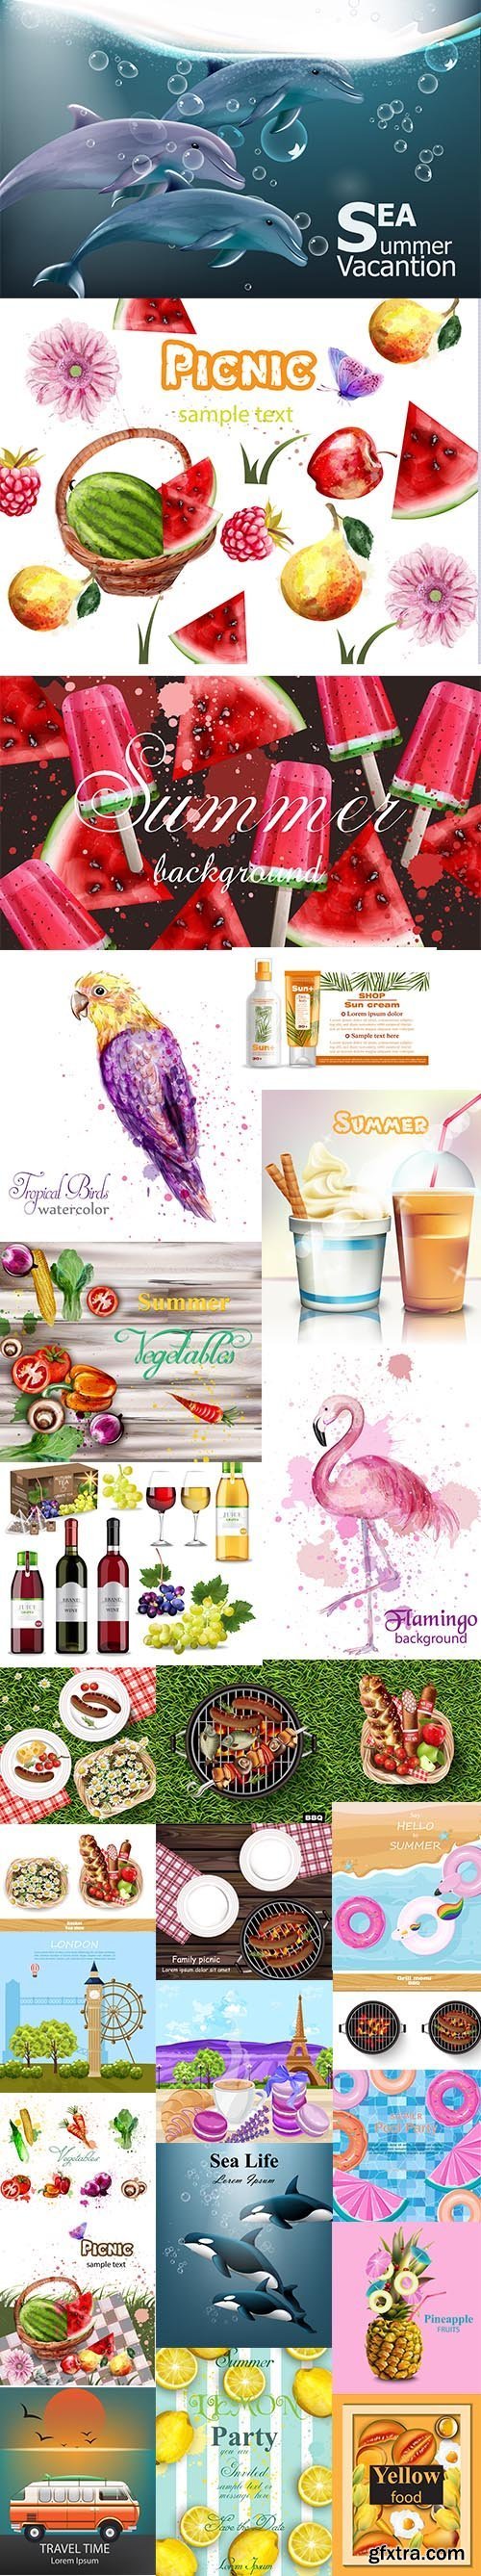 Watercolor Summer Collection with Picnic, Travel and Fruit Illustration Set